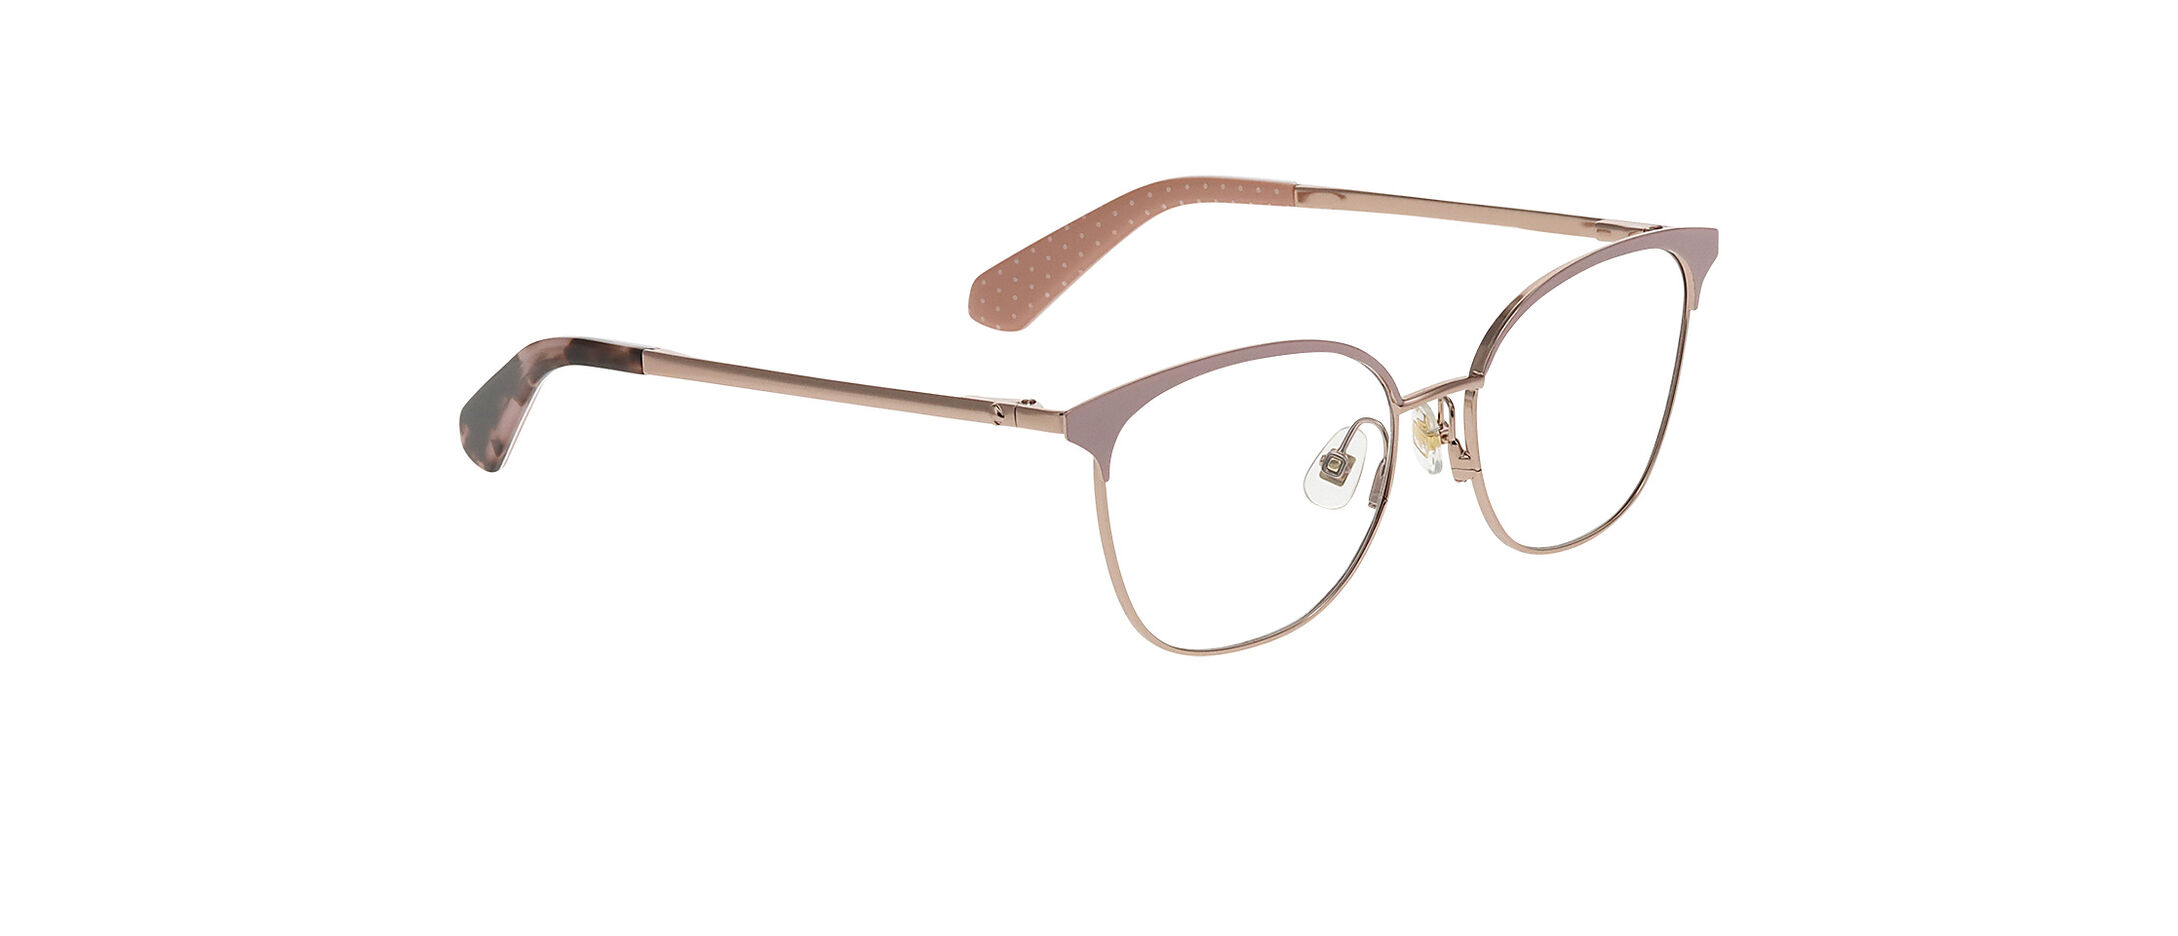 Kate Spade TANA/G Glasses | Free Shipping and Returns | Eyeconic